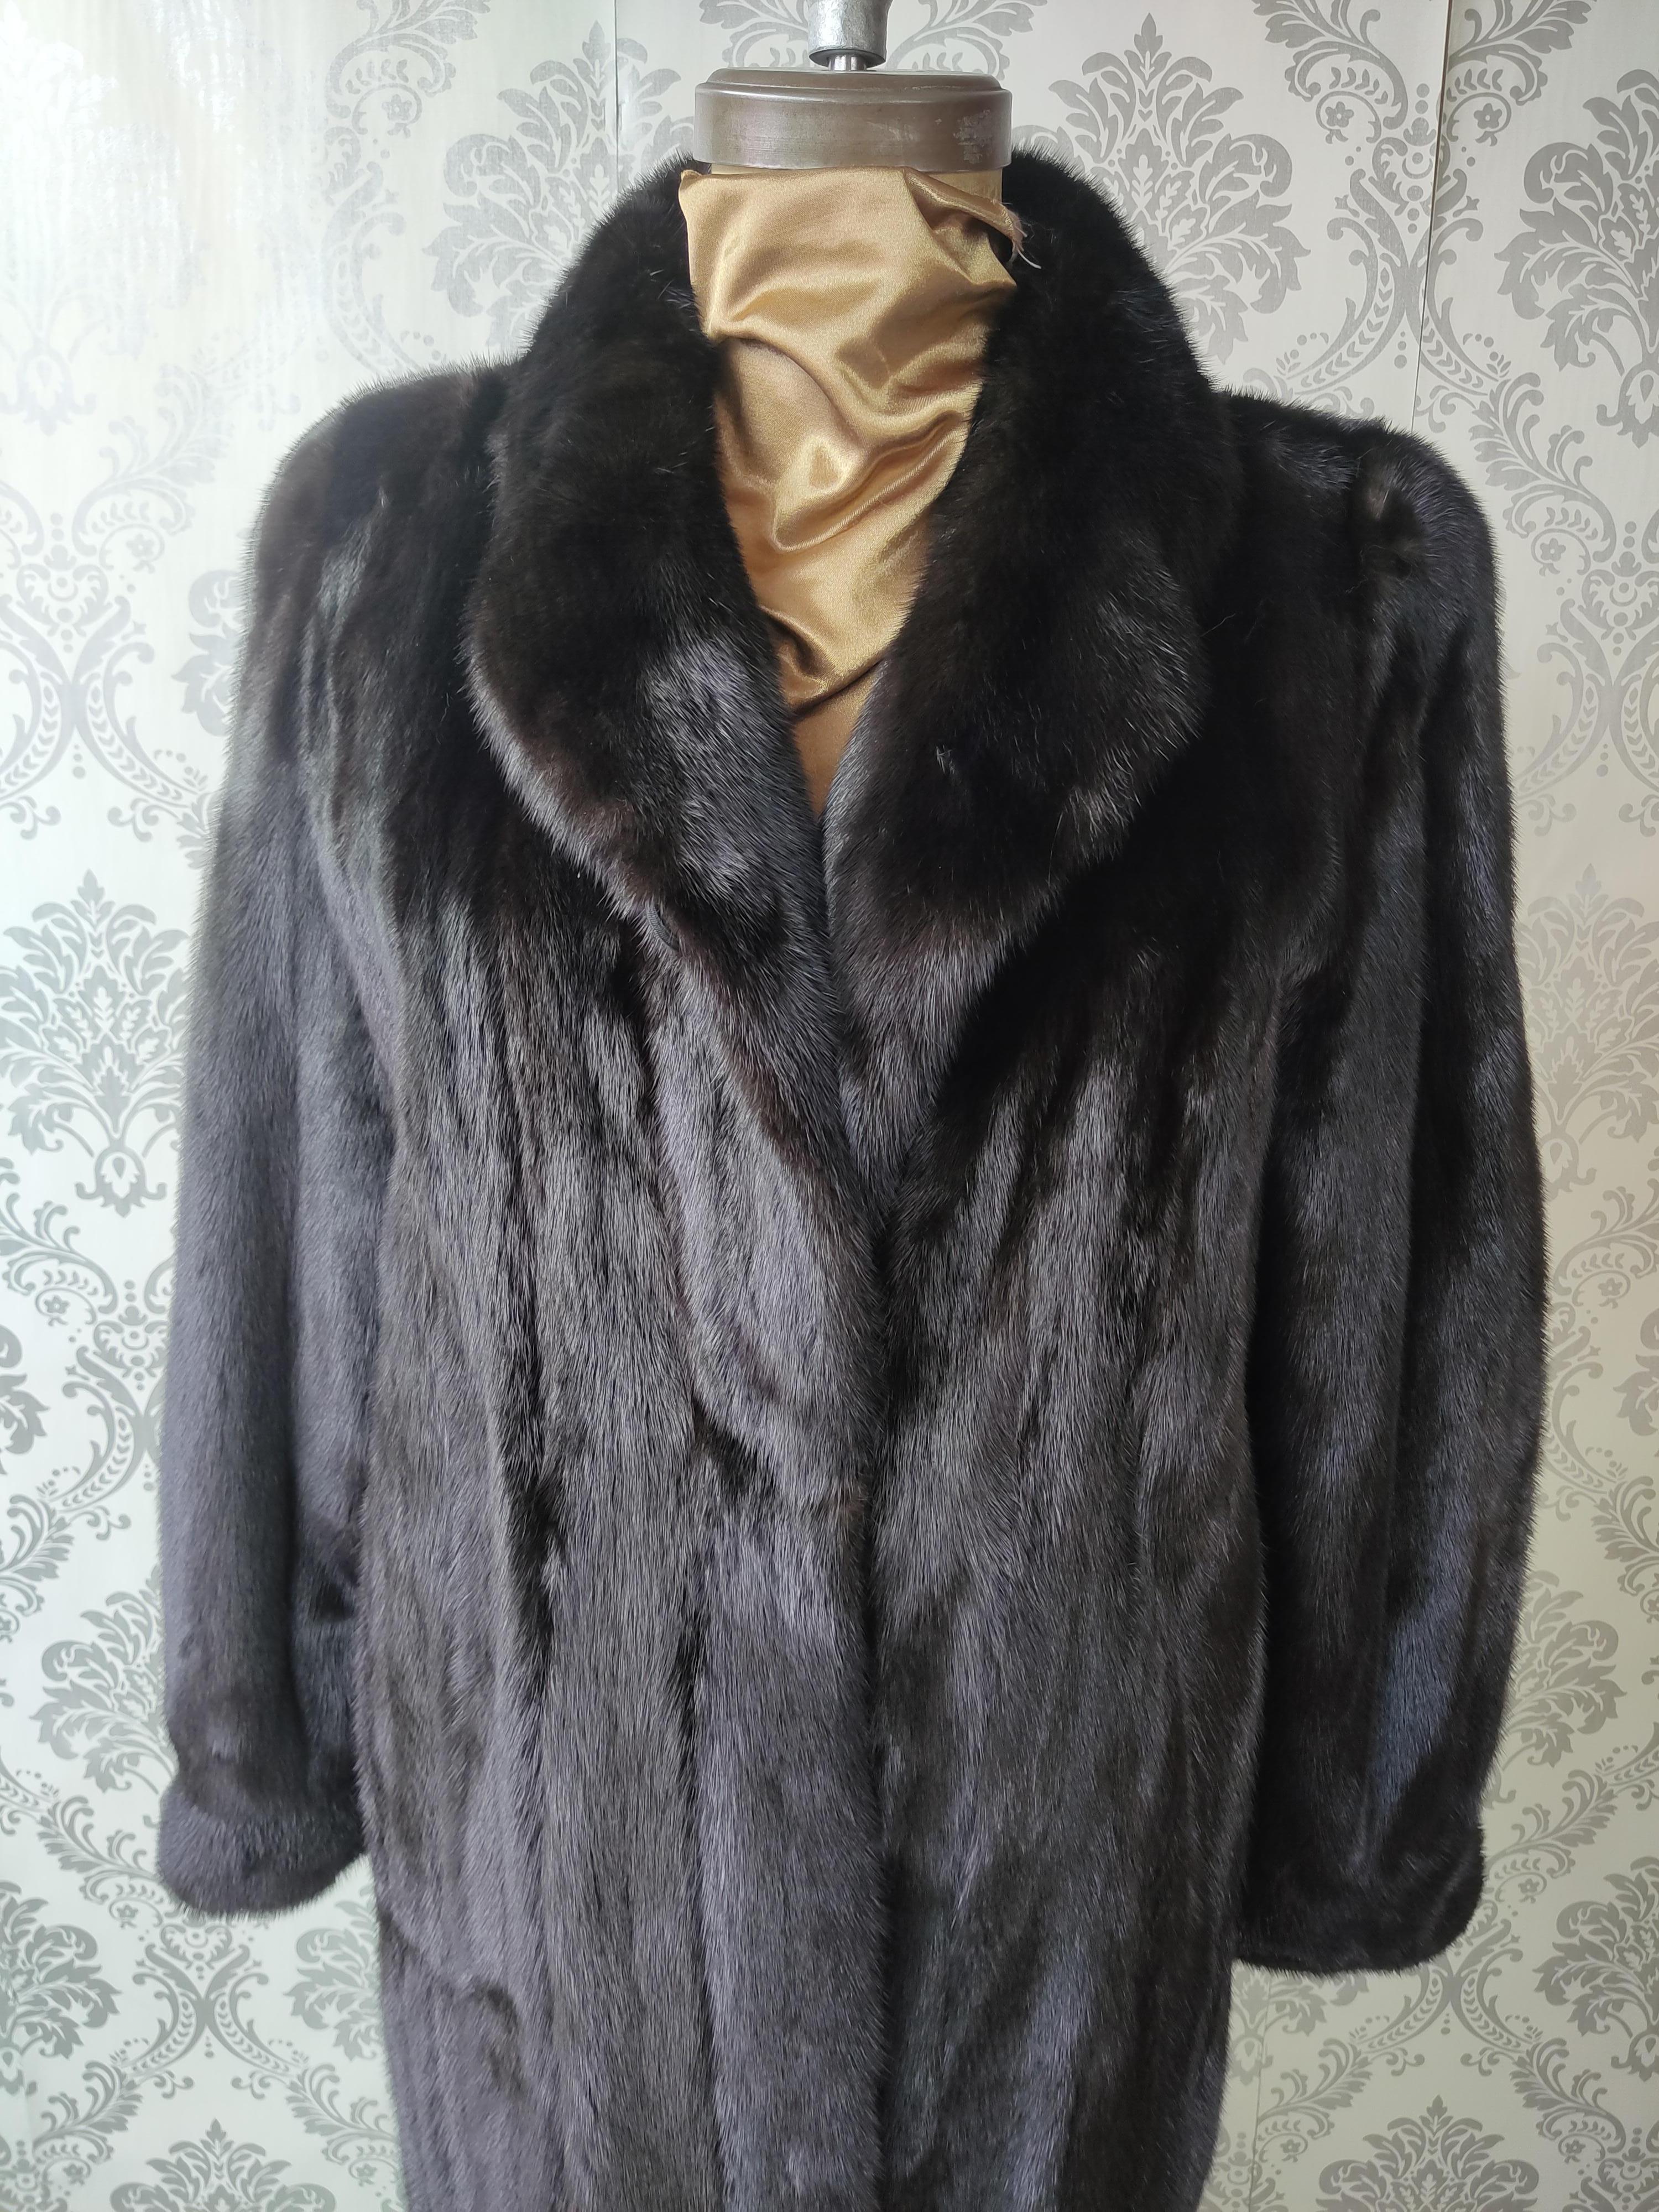 PRODUCT DESCRIPTION:

Brand new Carolina Herrera black mink fur coat with fluted sleeves 

Stock #ns99

Condition: New

Closure: Hooks & Eyes

Color: Black

Material: Black female opal mink 

Garment type: long length Coat

Sleeves: Dolman with